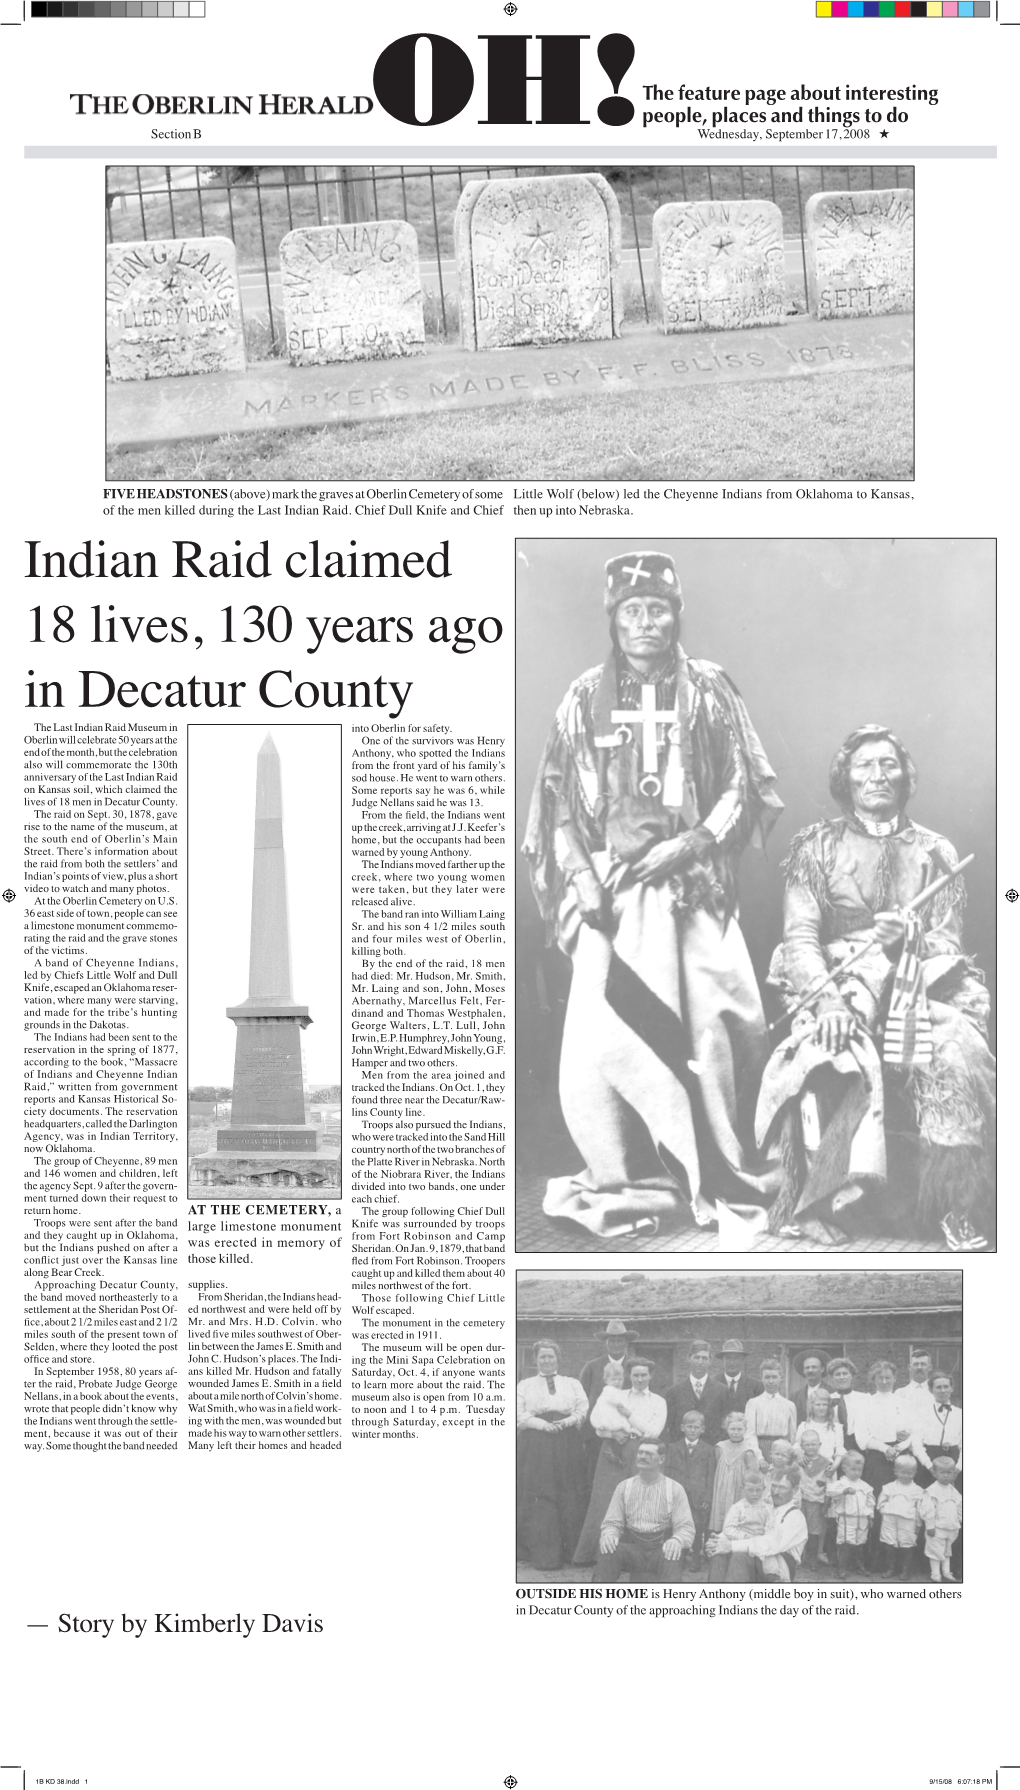 Indian Raid Claimed 18 Lives, 130 Years Ago in Decatur County the Last Indian Raid Museum in Into Oberlin for Safety